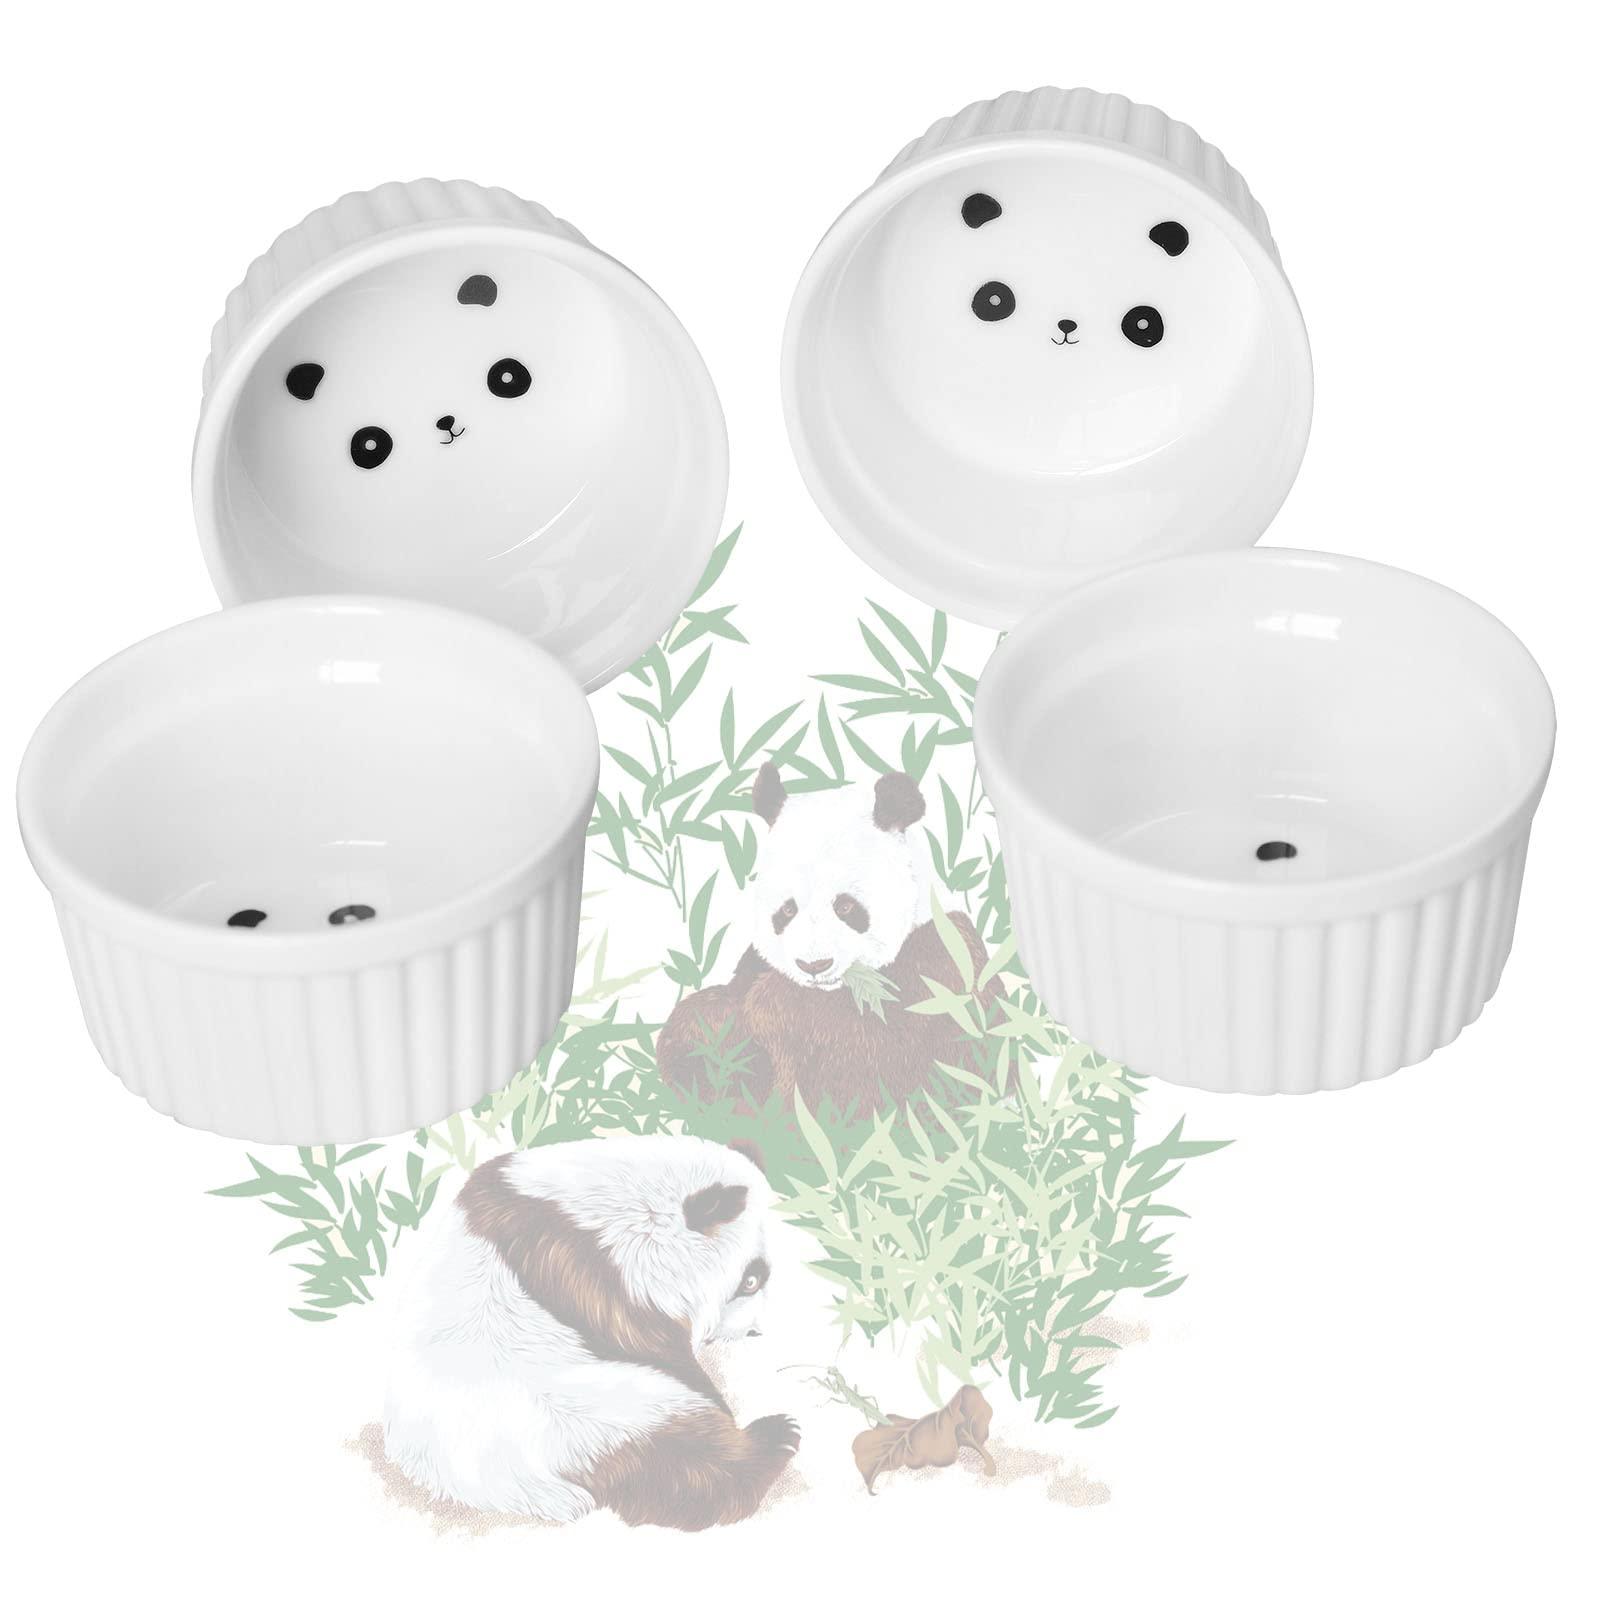 Cinf Panda 4 oz Set of 4 Ramekins Pudding Baking Cup Souffle Cups Dishes Bowl - CookCave